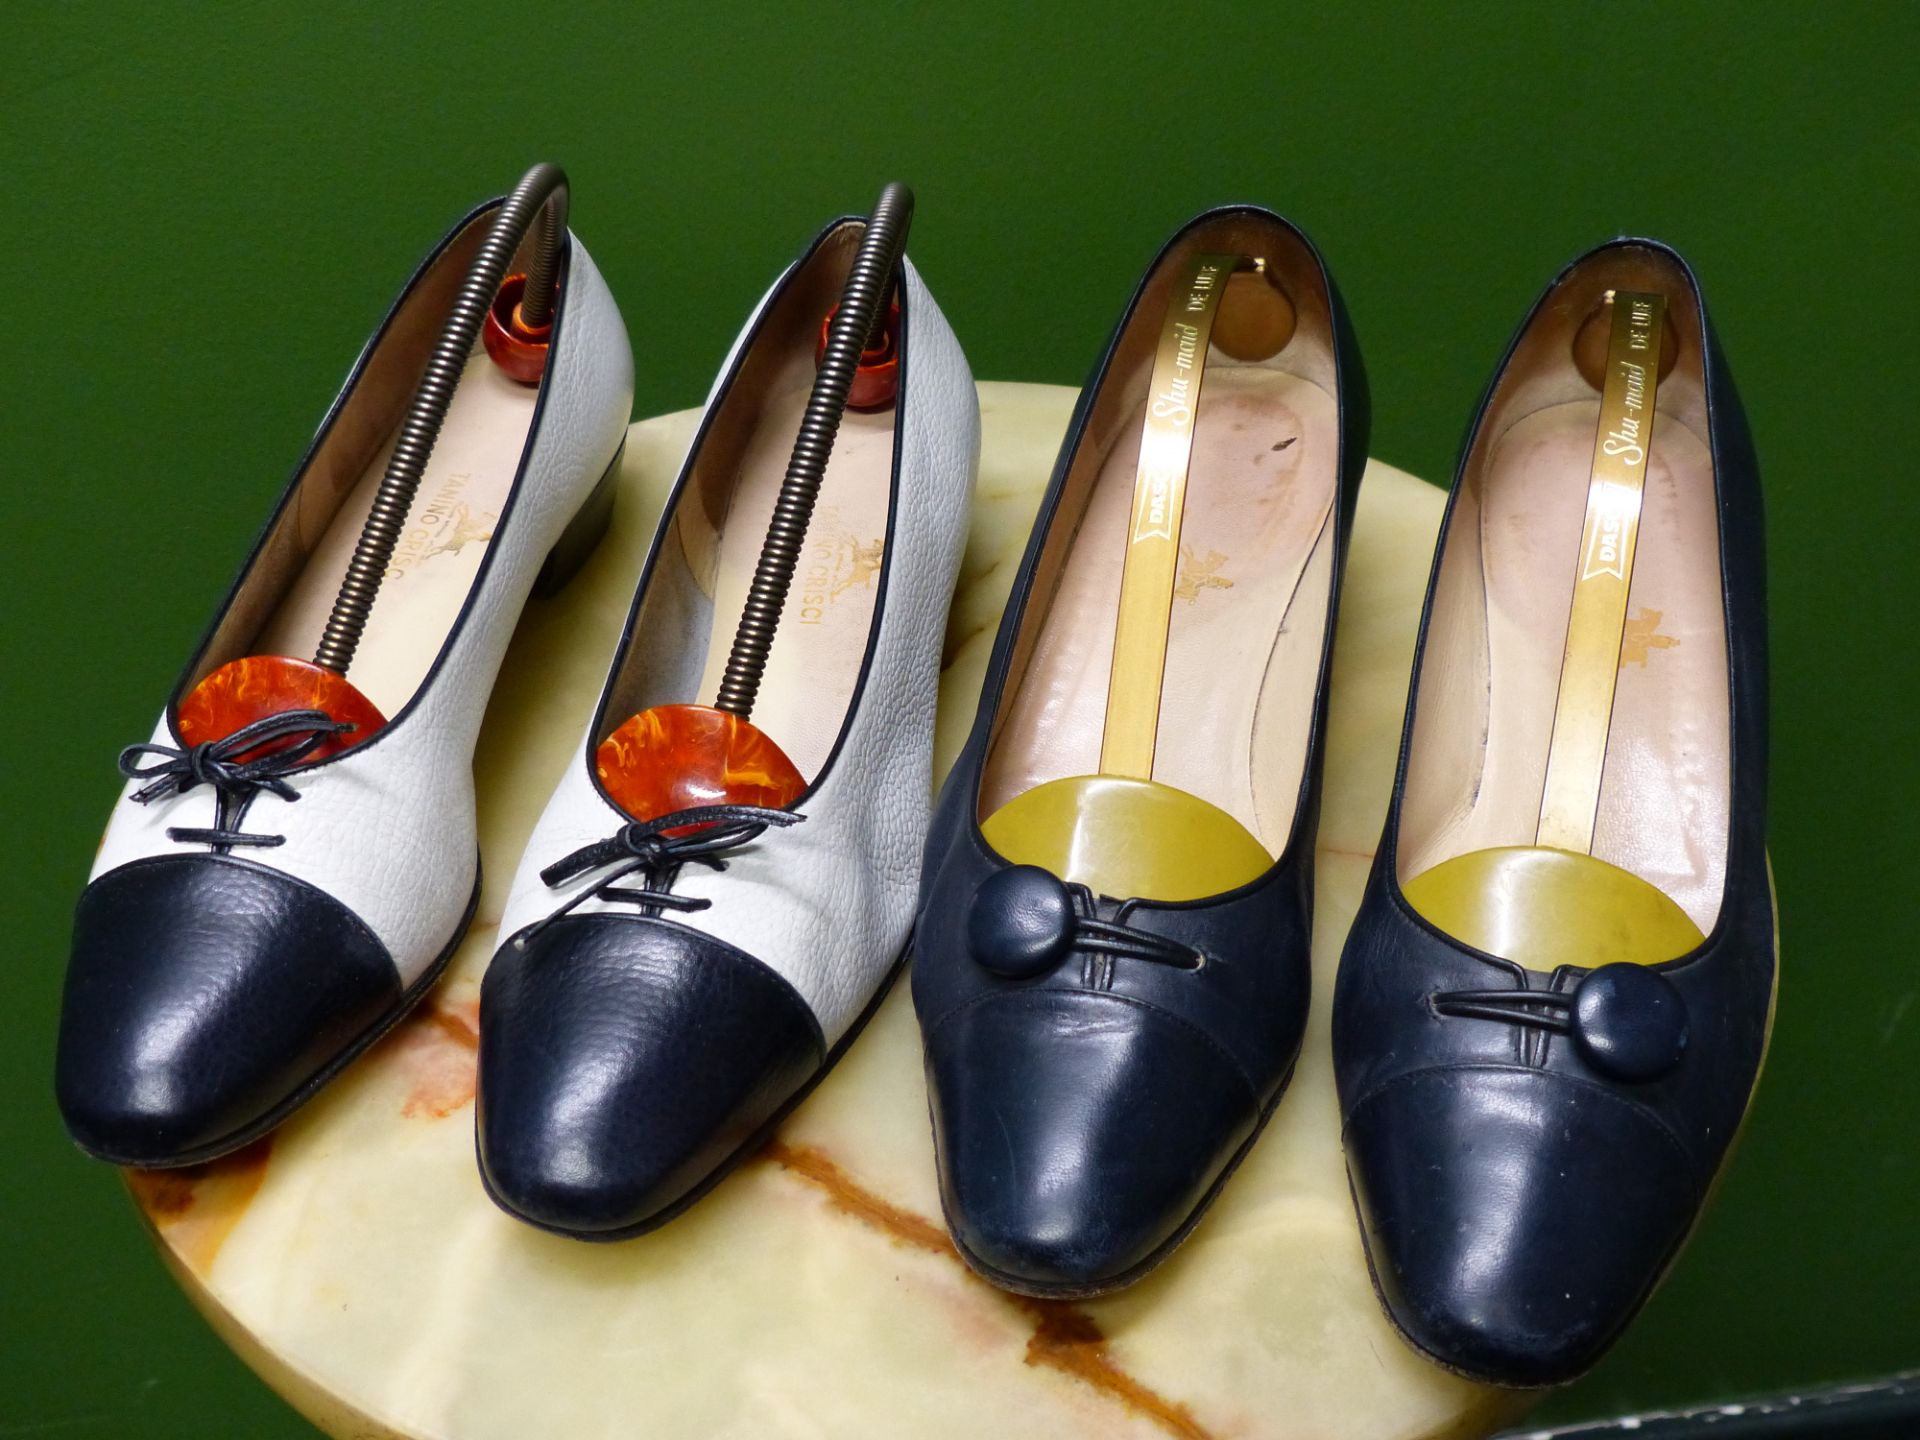 SHOES. TWO PAIRS TANINO CRISCI NAVY AND MUSTARD HEALS EUR SIZE 39. WHITE AND NAVY SLIP ON'S EUR SIZE